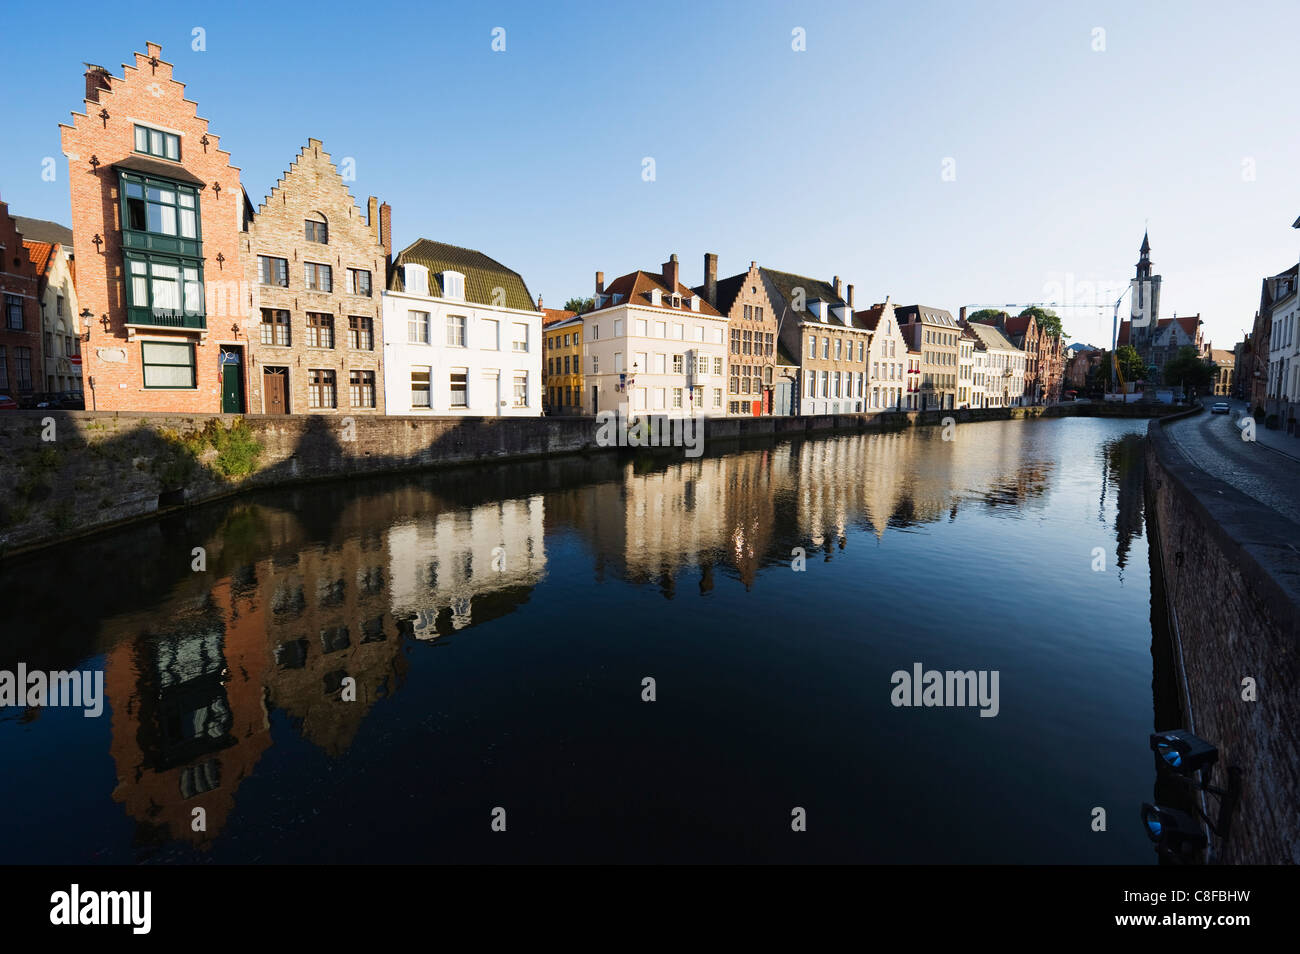 Reflection of old houses in a canal, Old Town, UNESCO World Heritage Site, Bruges, Flanders, Belgium Stock Photo